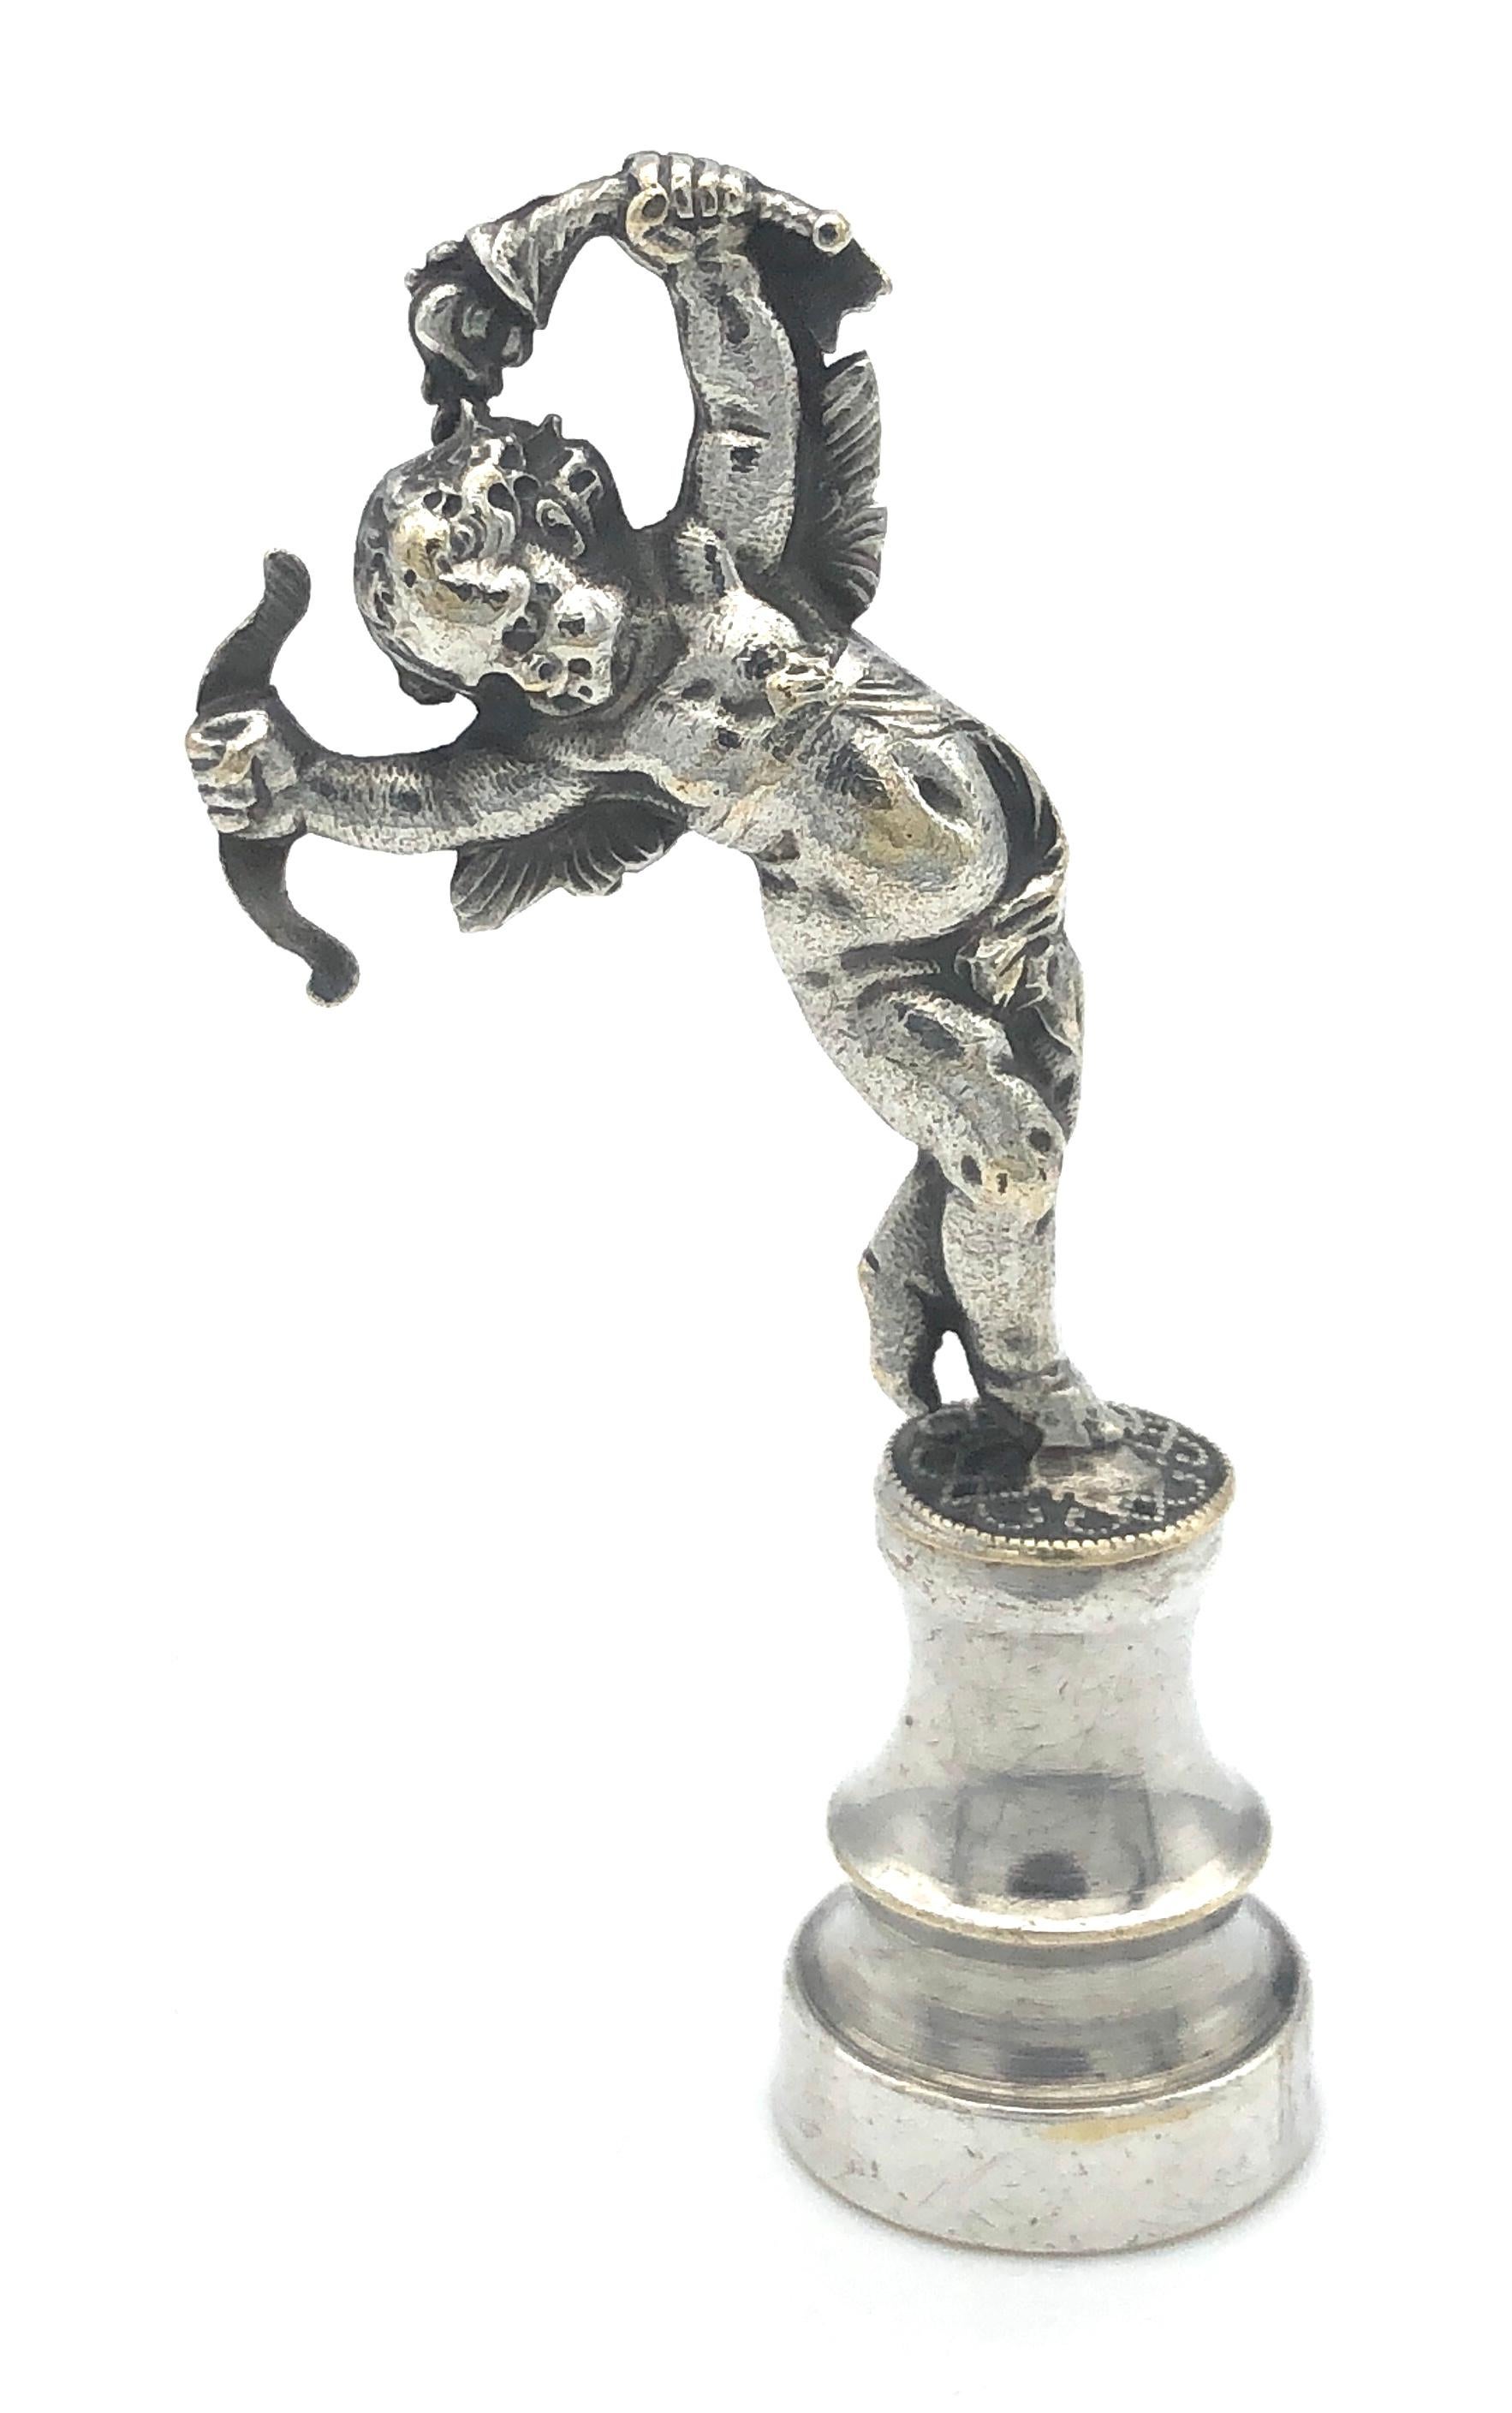 Delightfully modelled cupid holding bow and arrows in his hands. The dancing amor is standing on a pedestal. The seal is made out of silver plated metal and carries the initials J D. This charming figure was most certainly offerred as a love token.